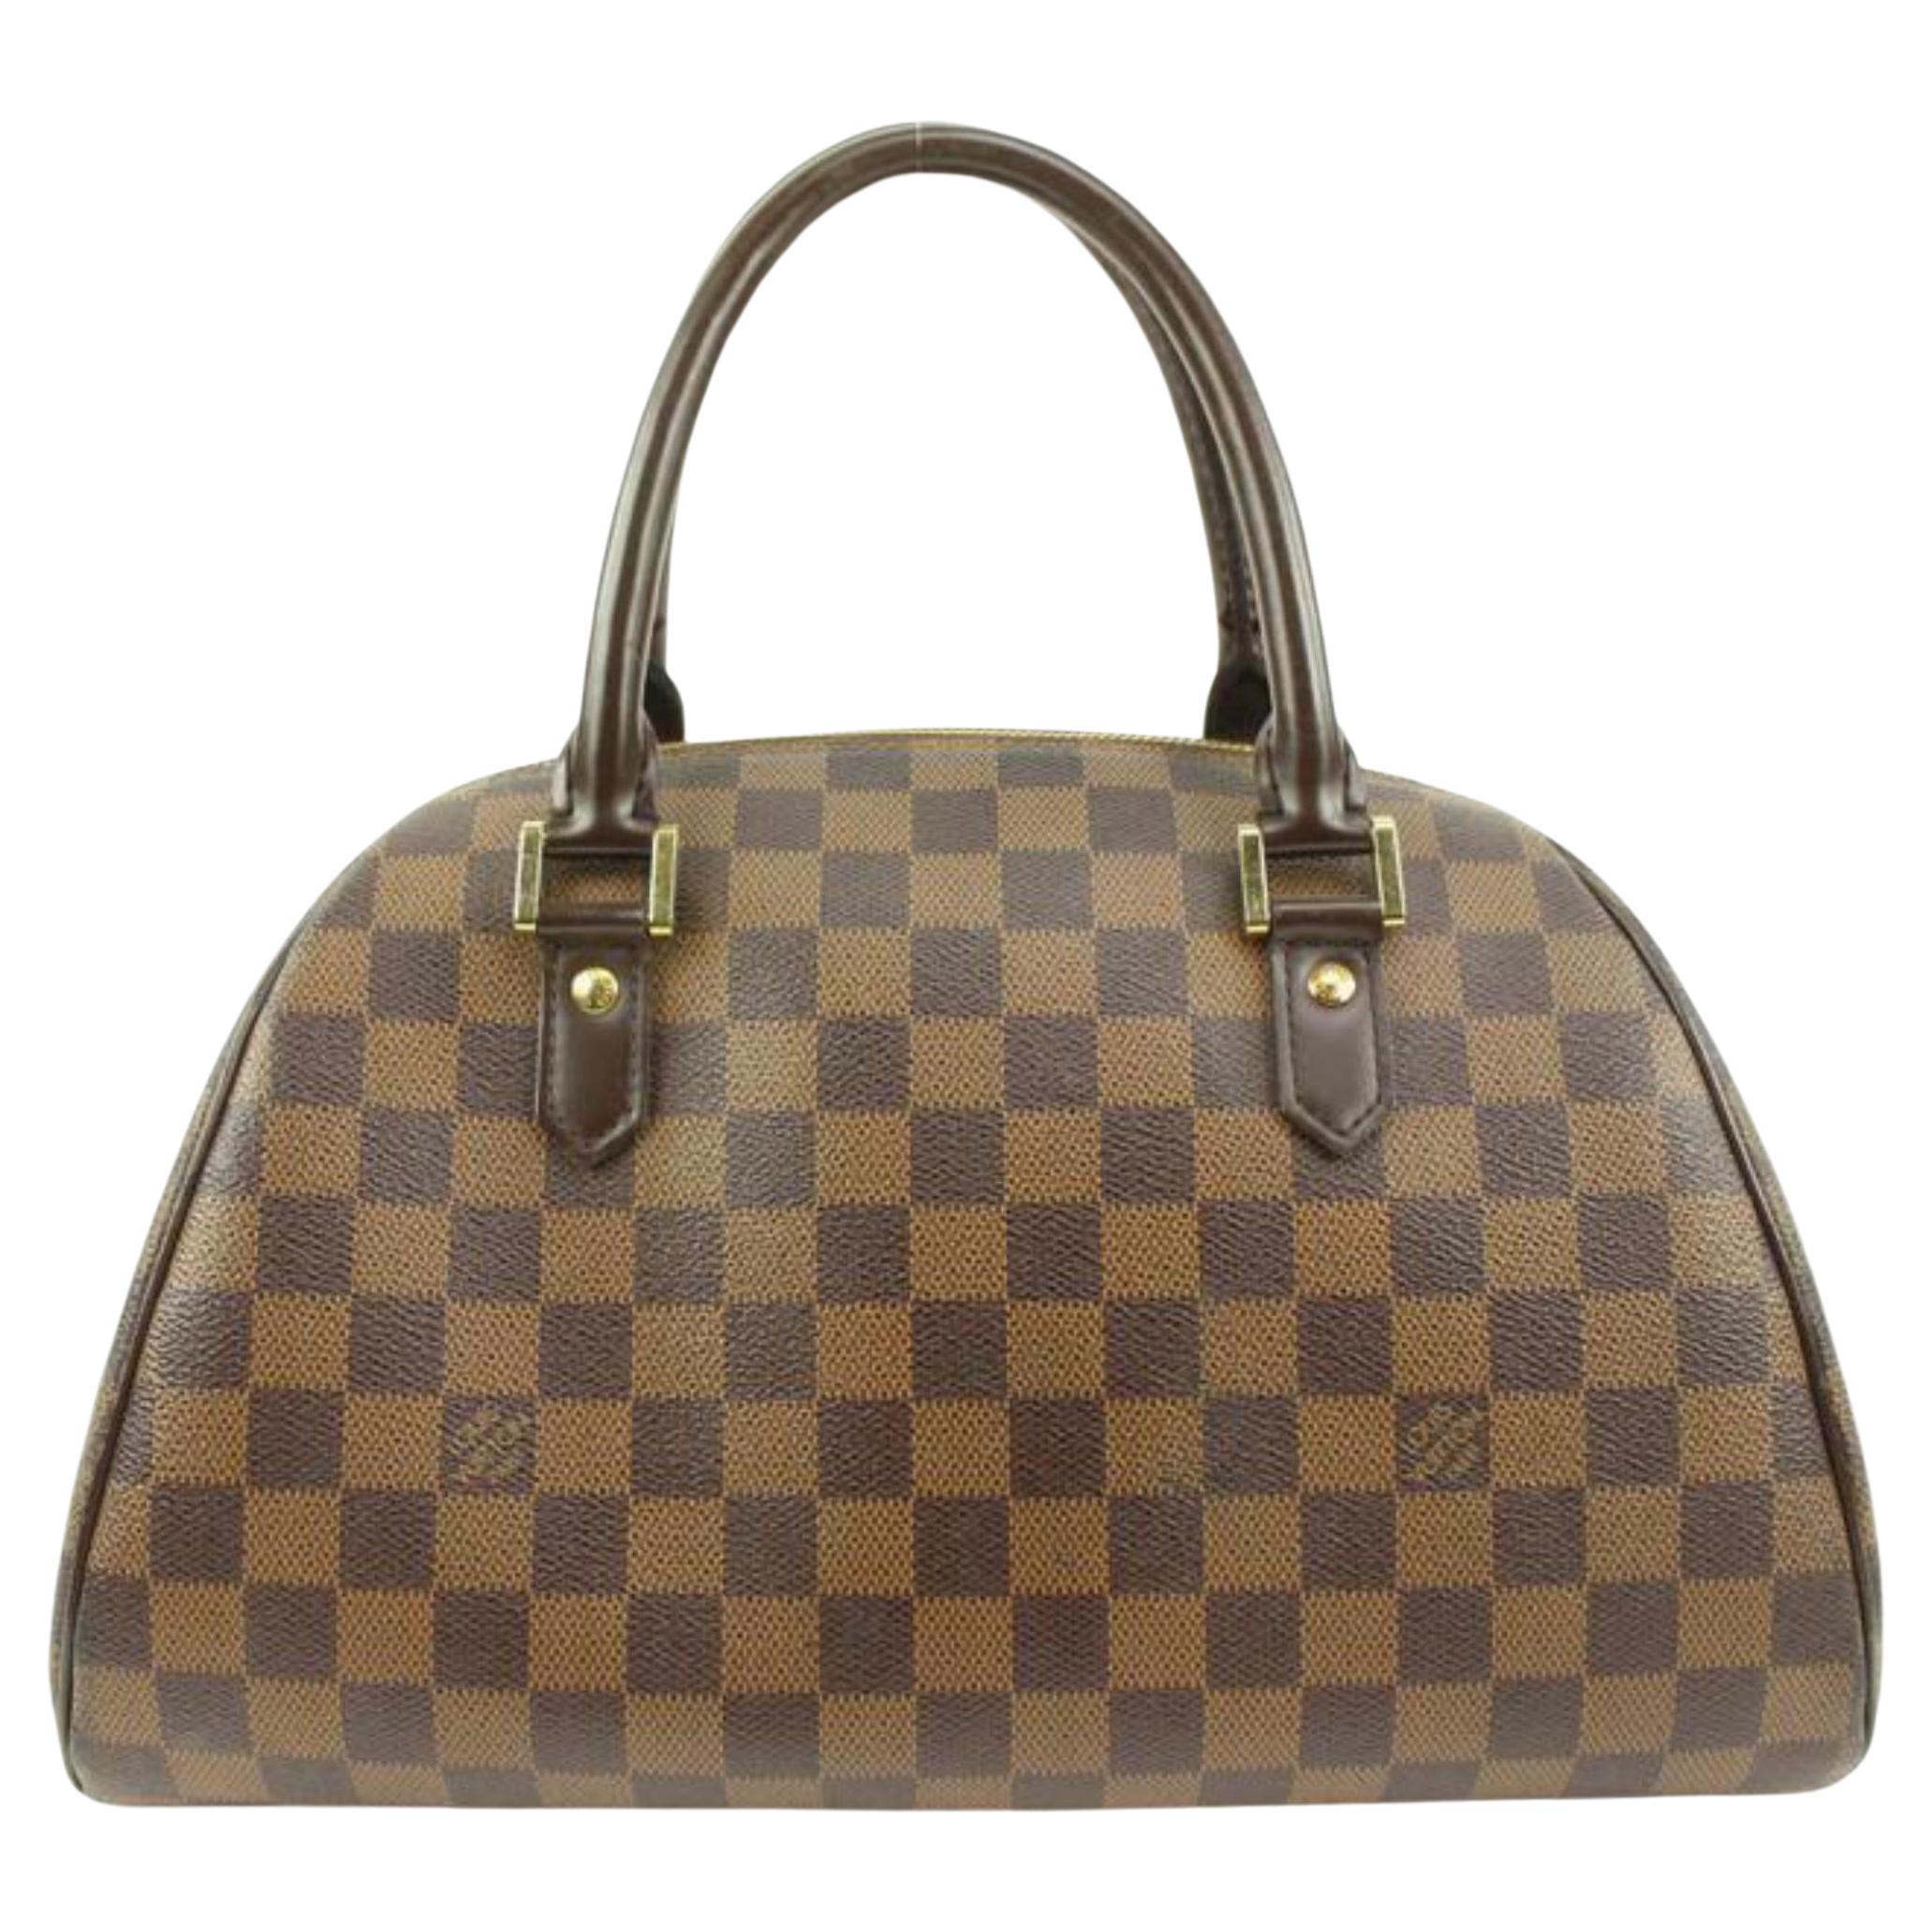 Review: We love the Louis Vuitton Palermo (discontinued but not